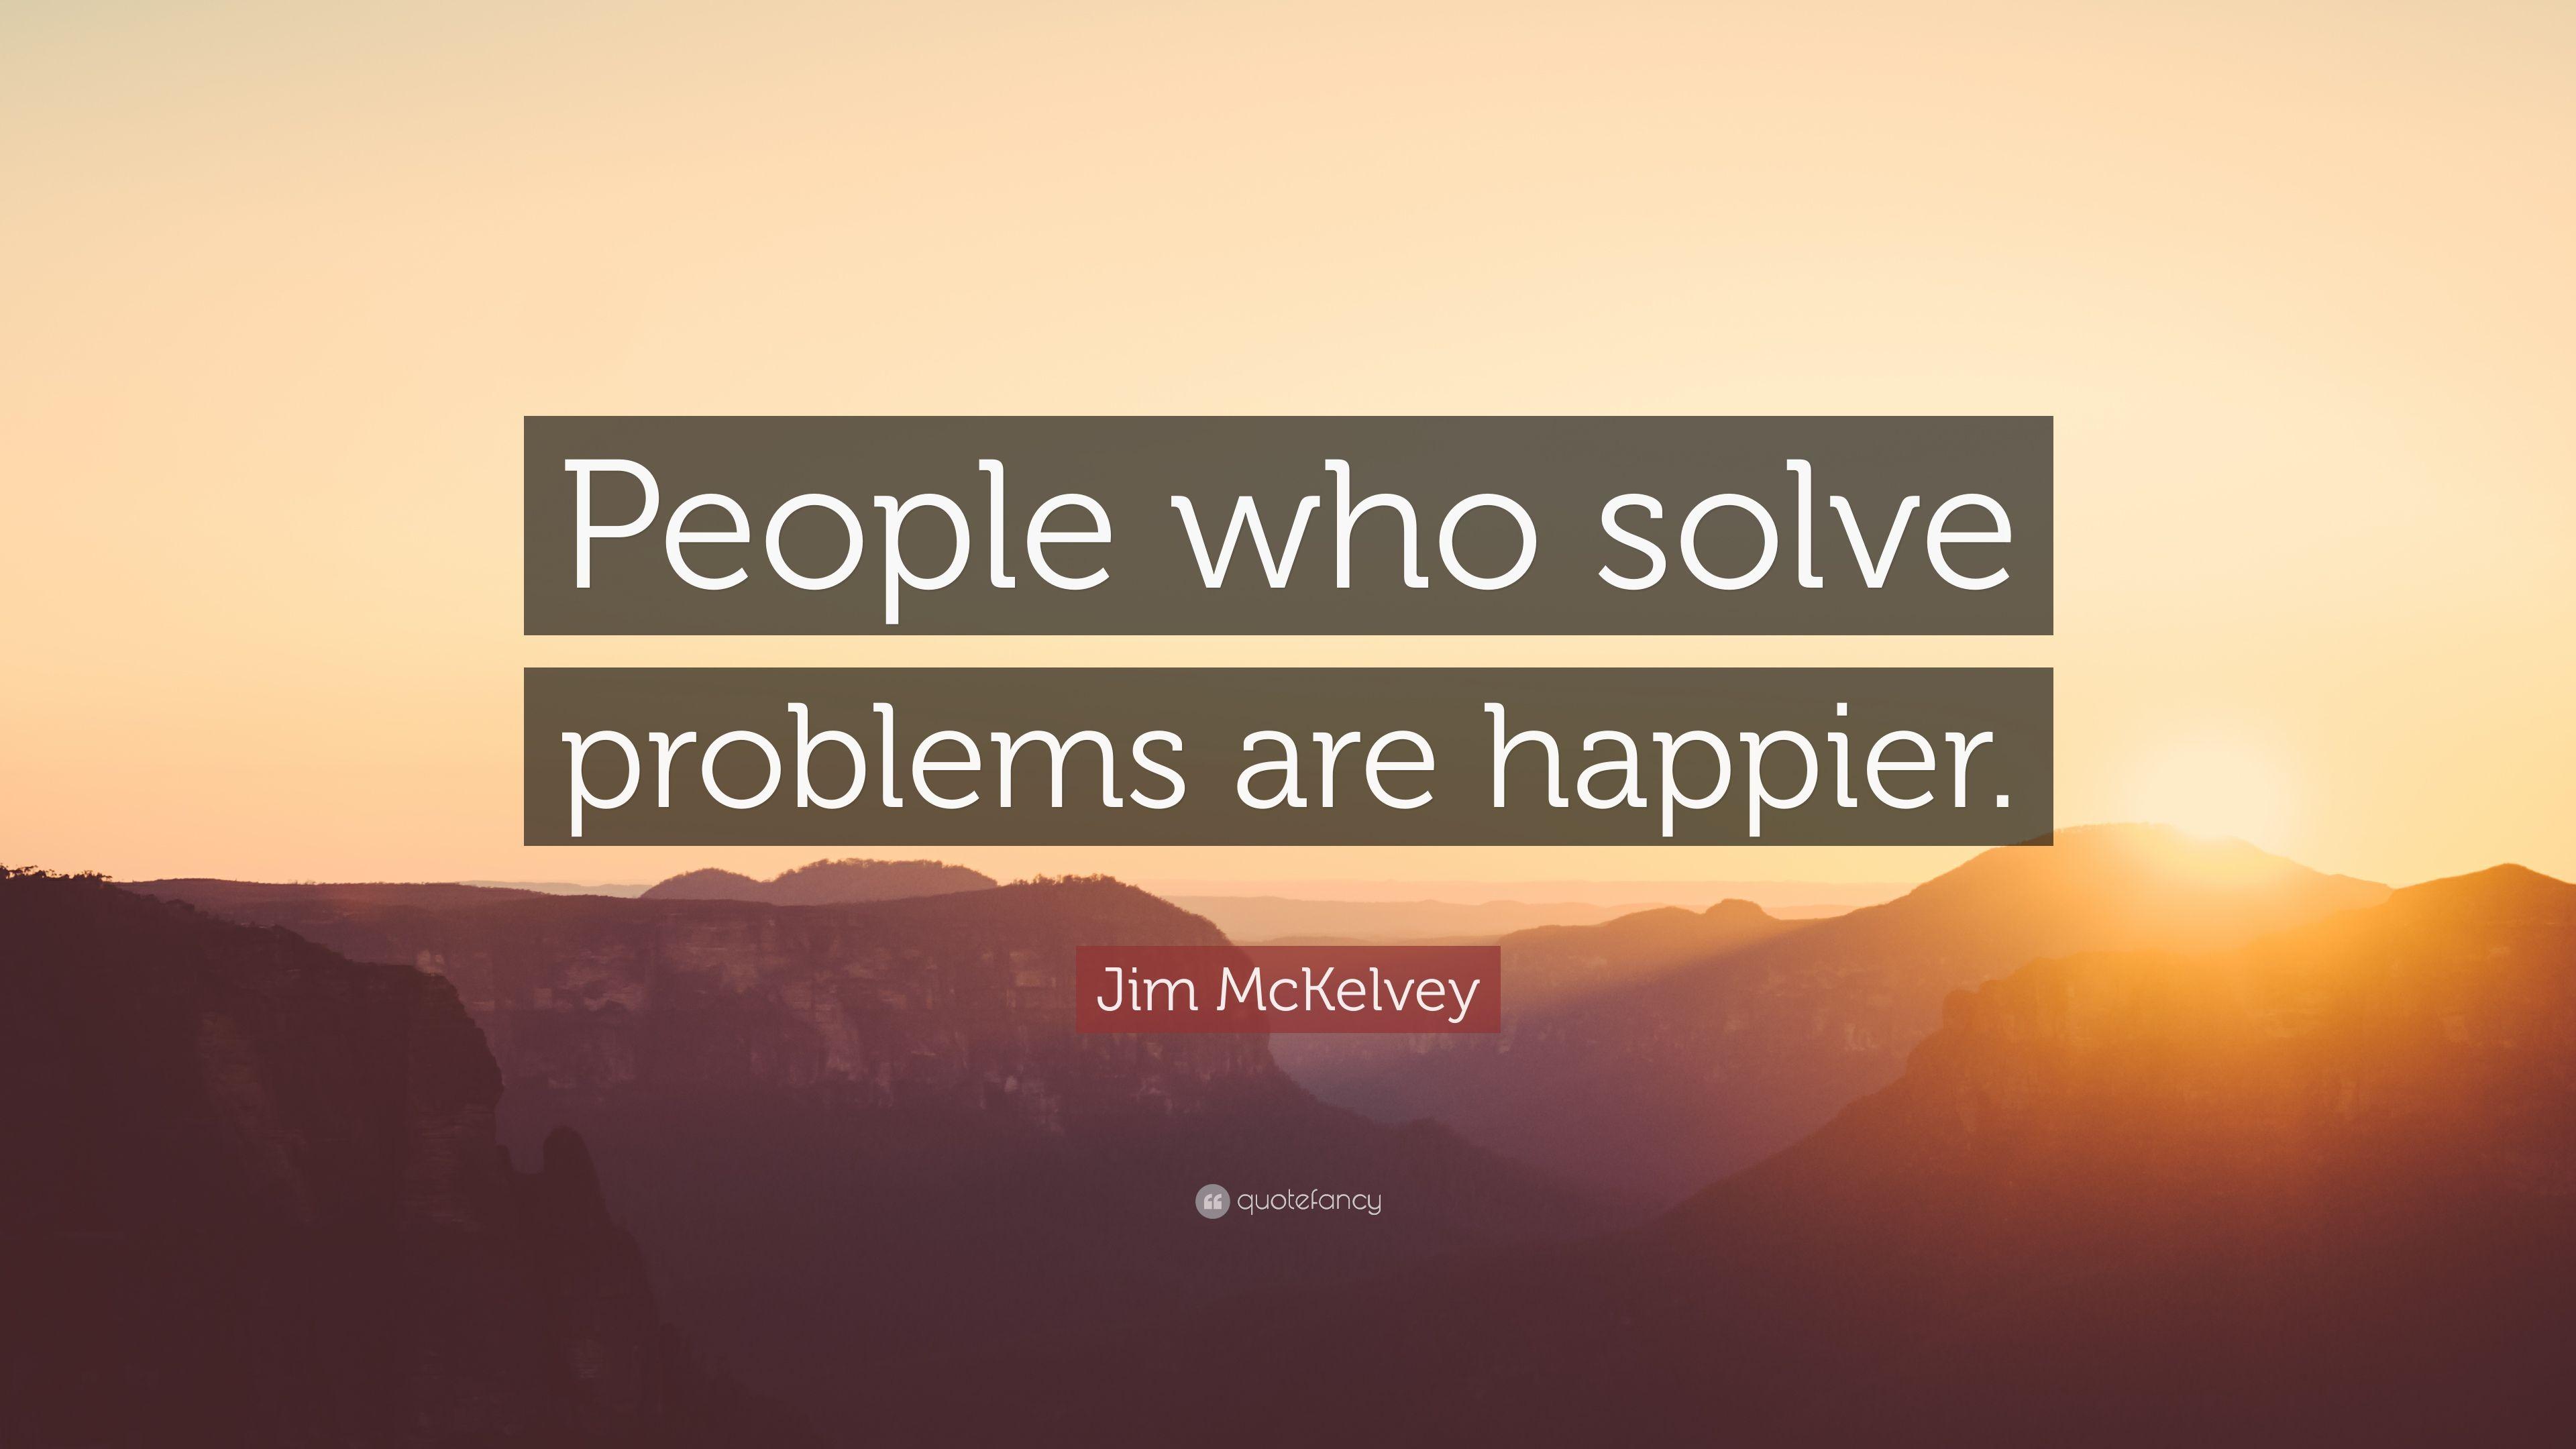 Jim McKelvey Quote: “People who solve problems are happier.” 7